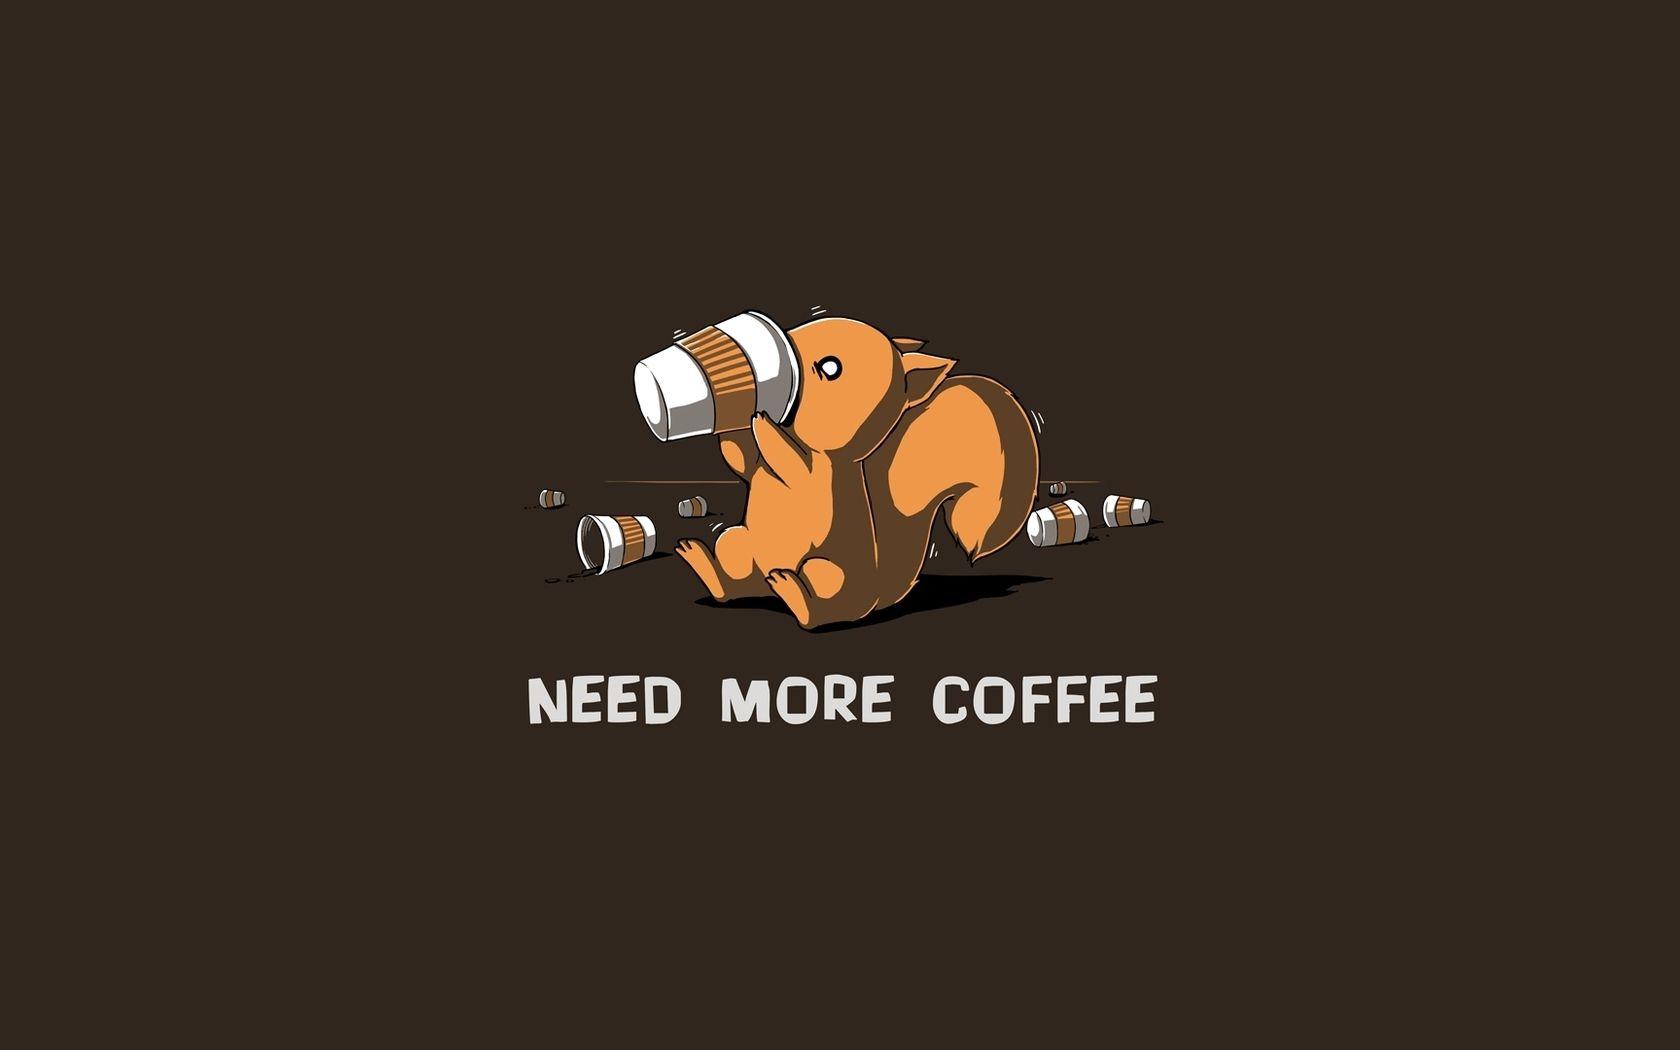 Need More Coffee wallpaper and image, picture, photo